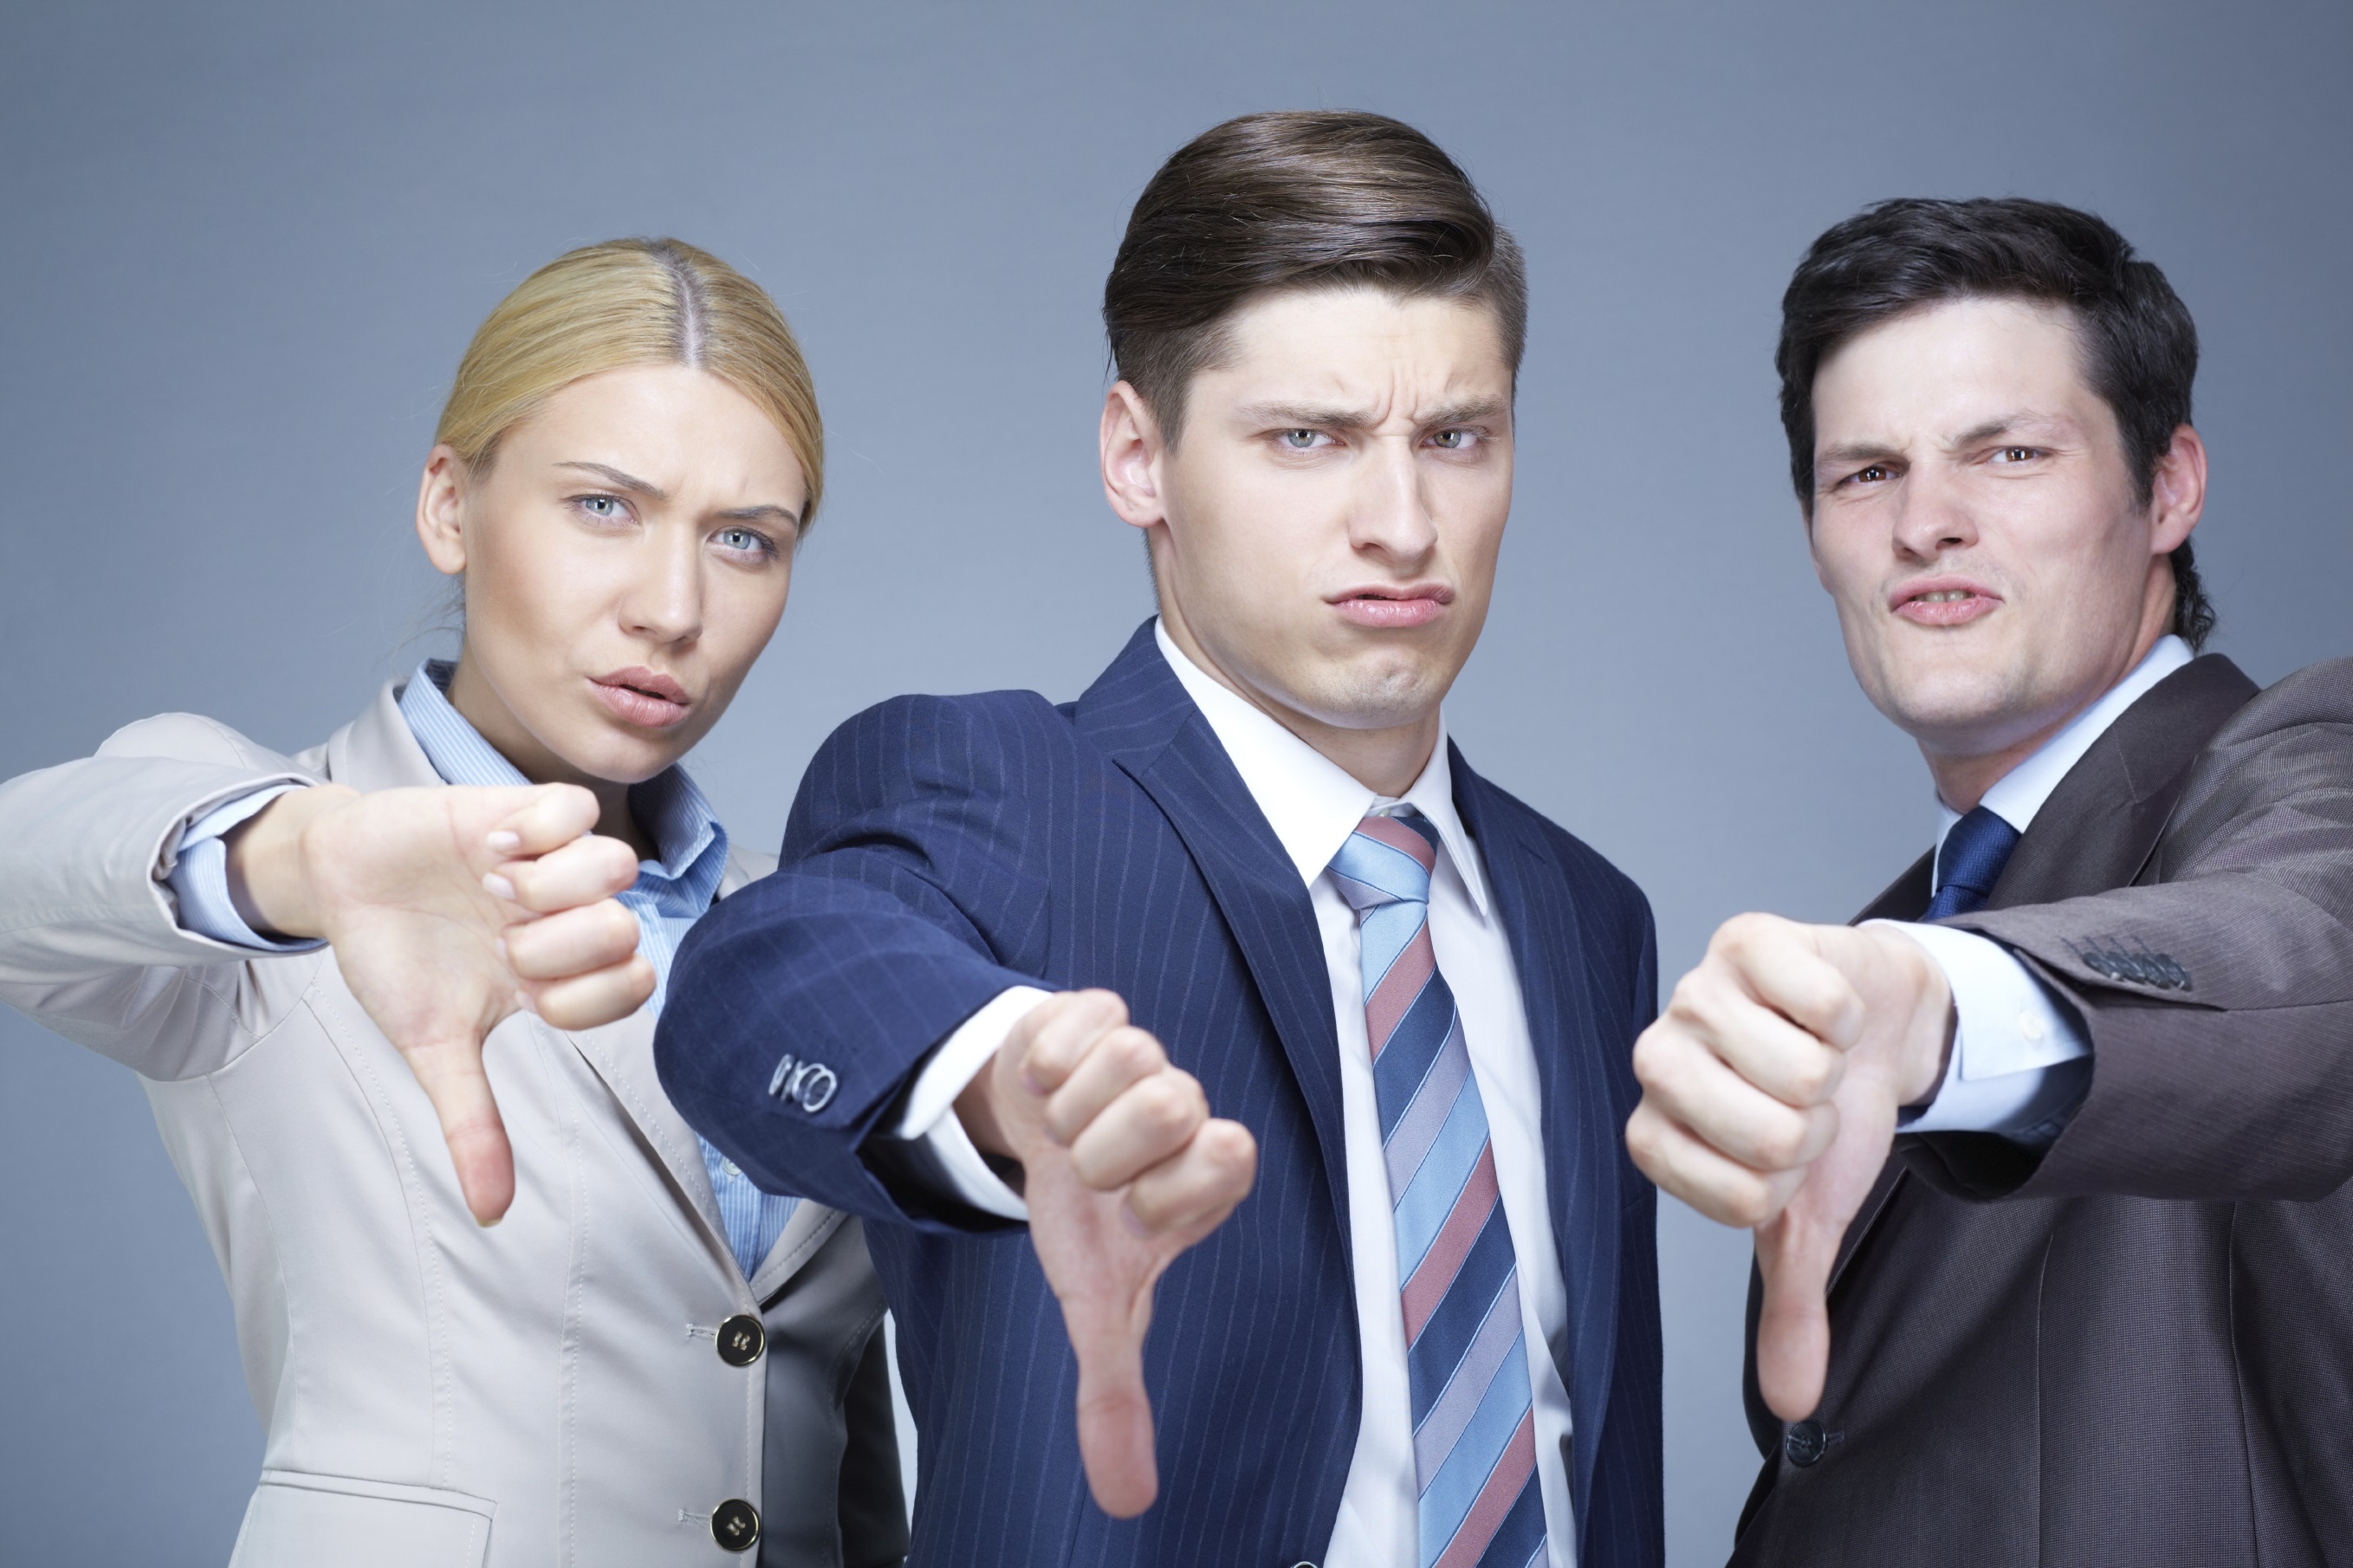 anger-angry-young-associates-lawyers-businesspeople.jpg